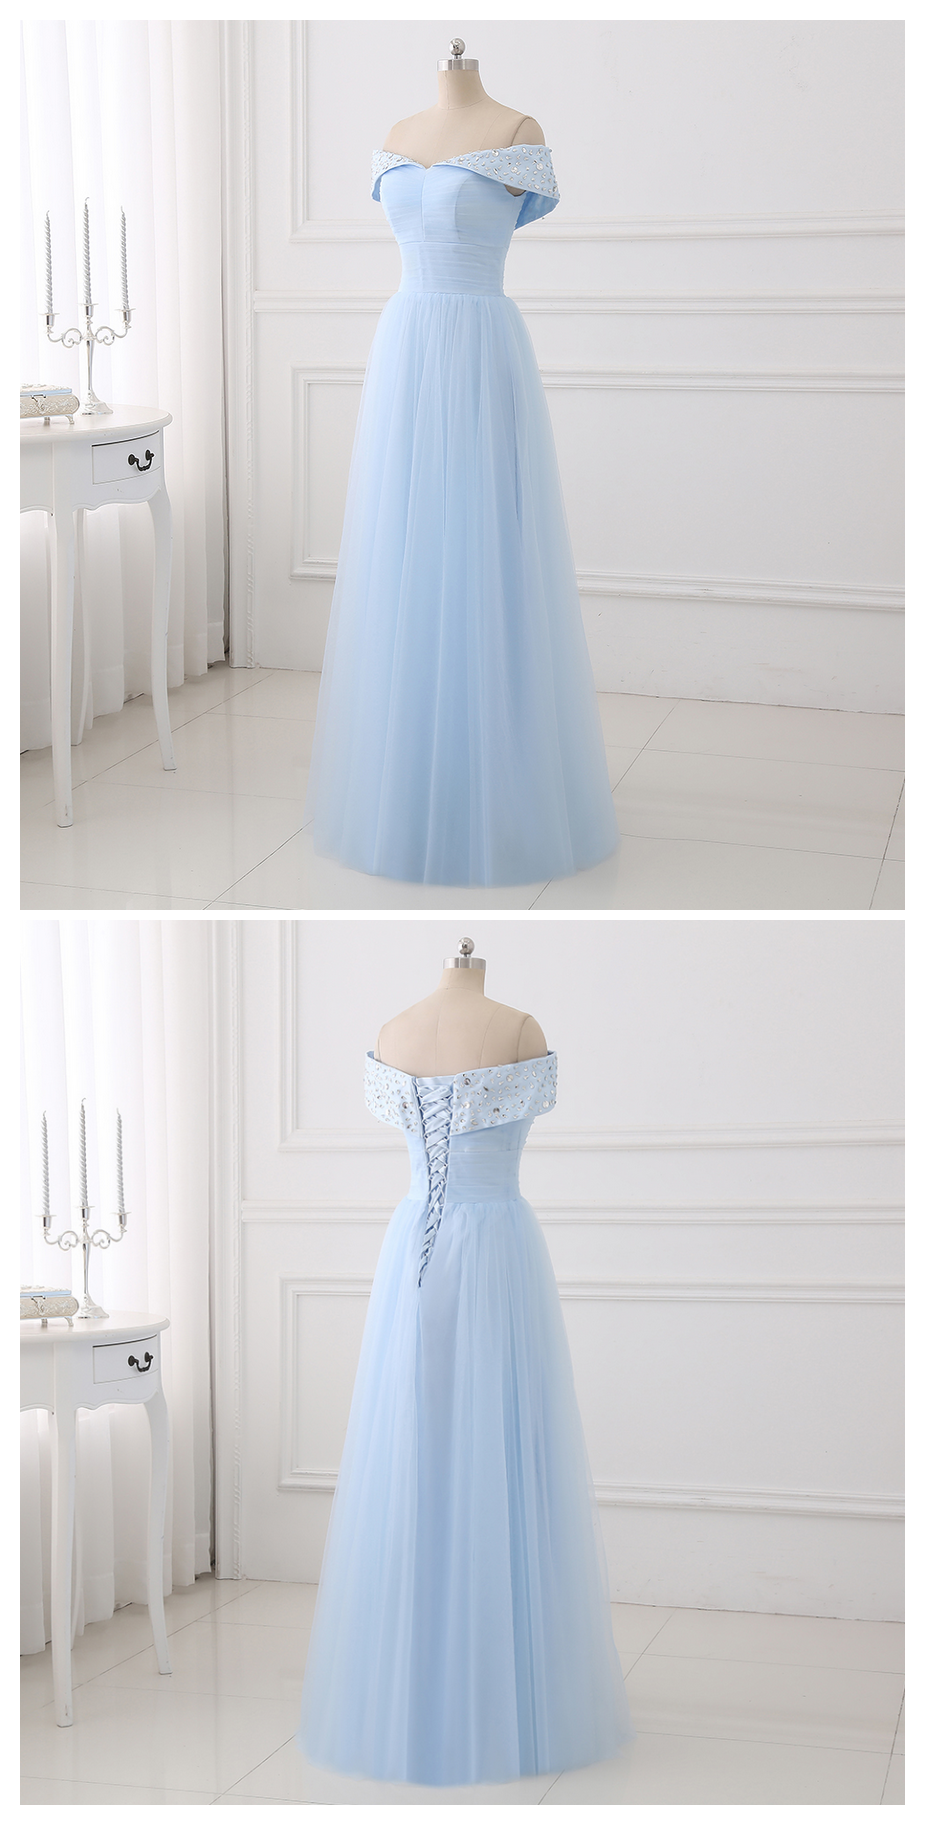 Tulle Beaded Off Shoulder Party Dress, A-line Bridesmaid Dress